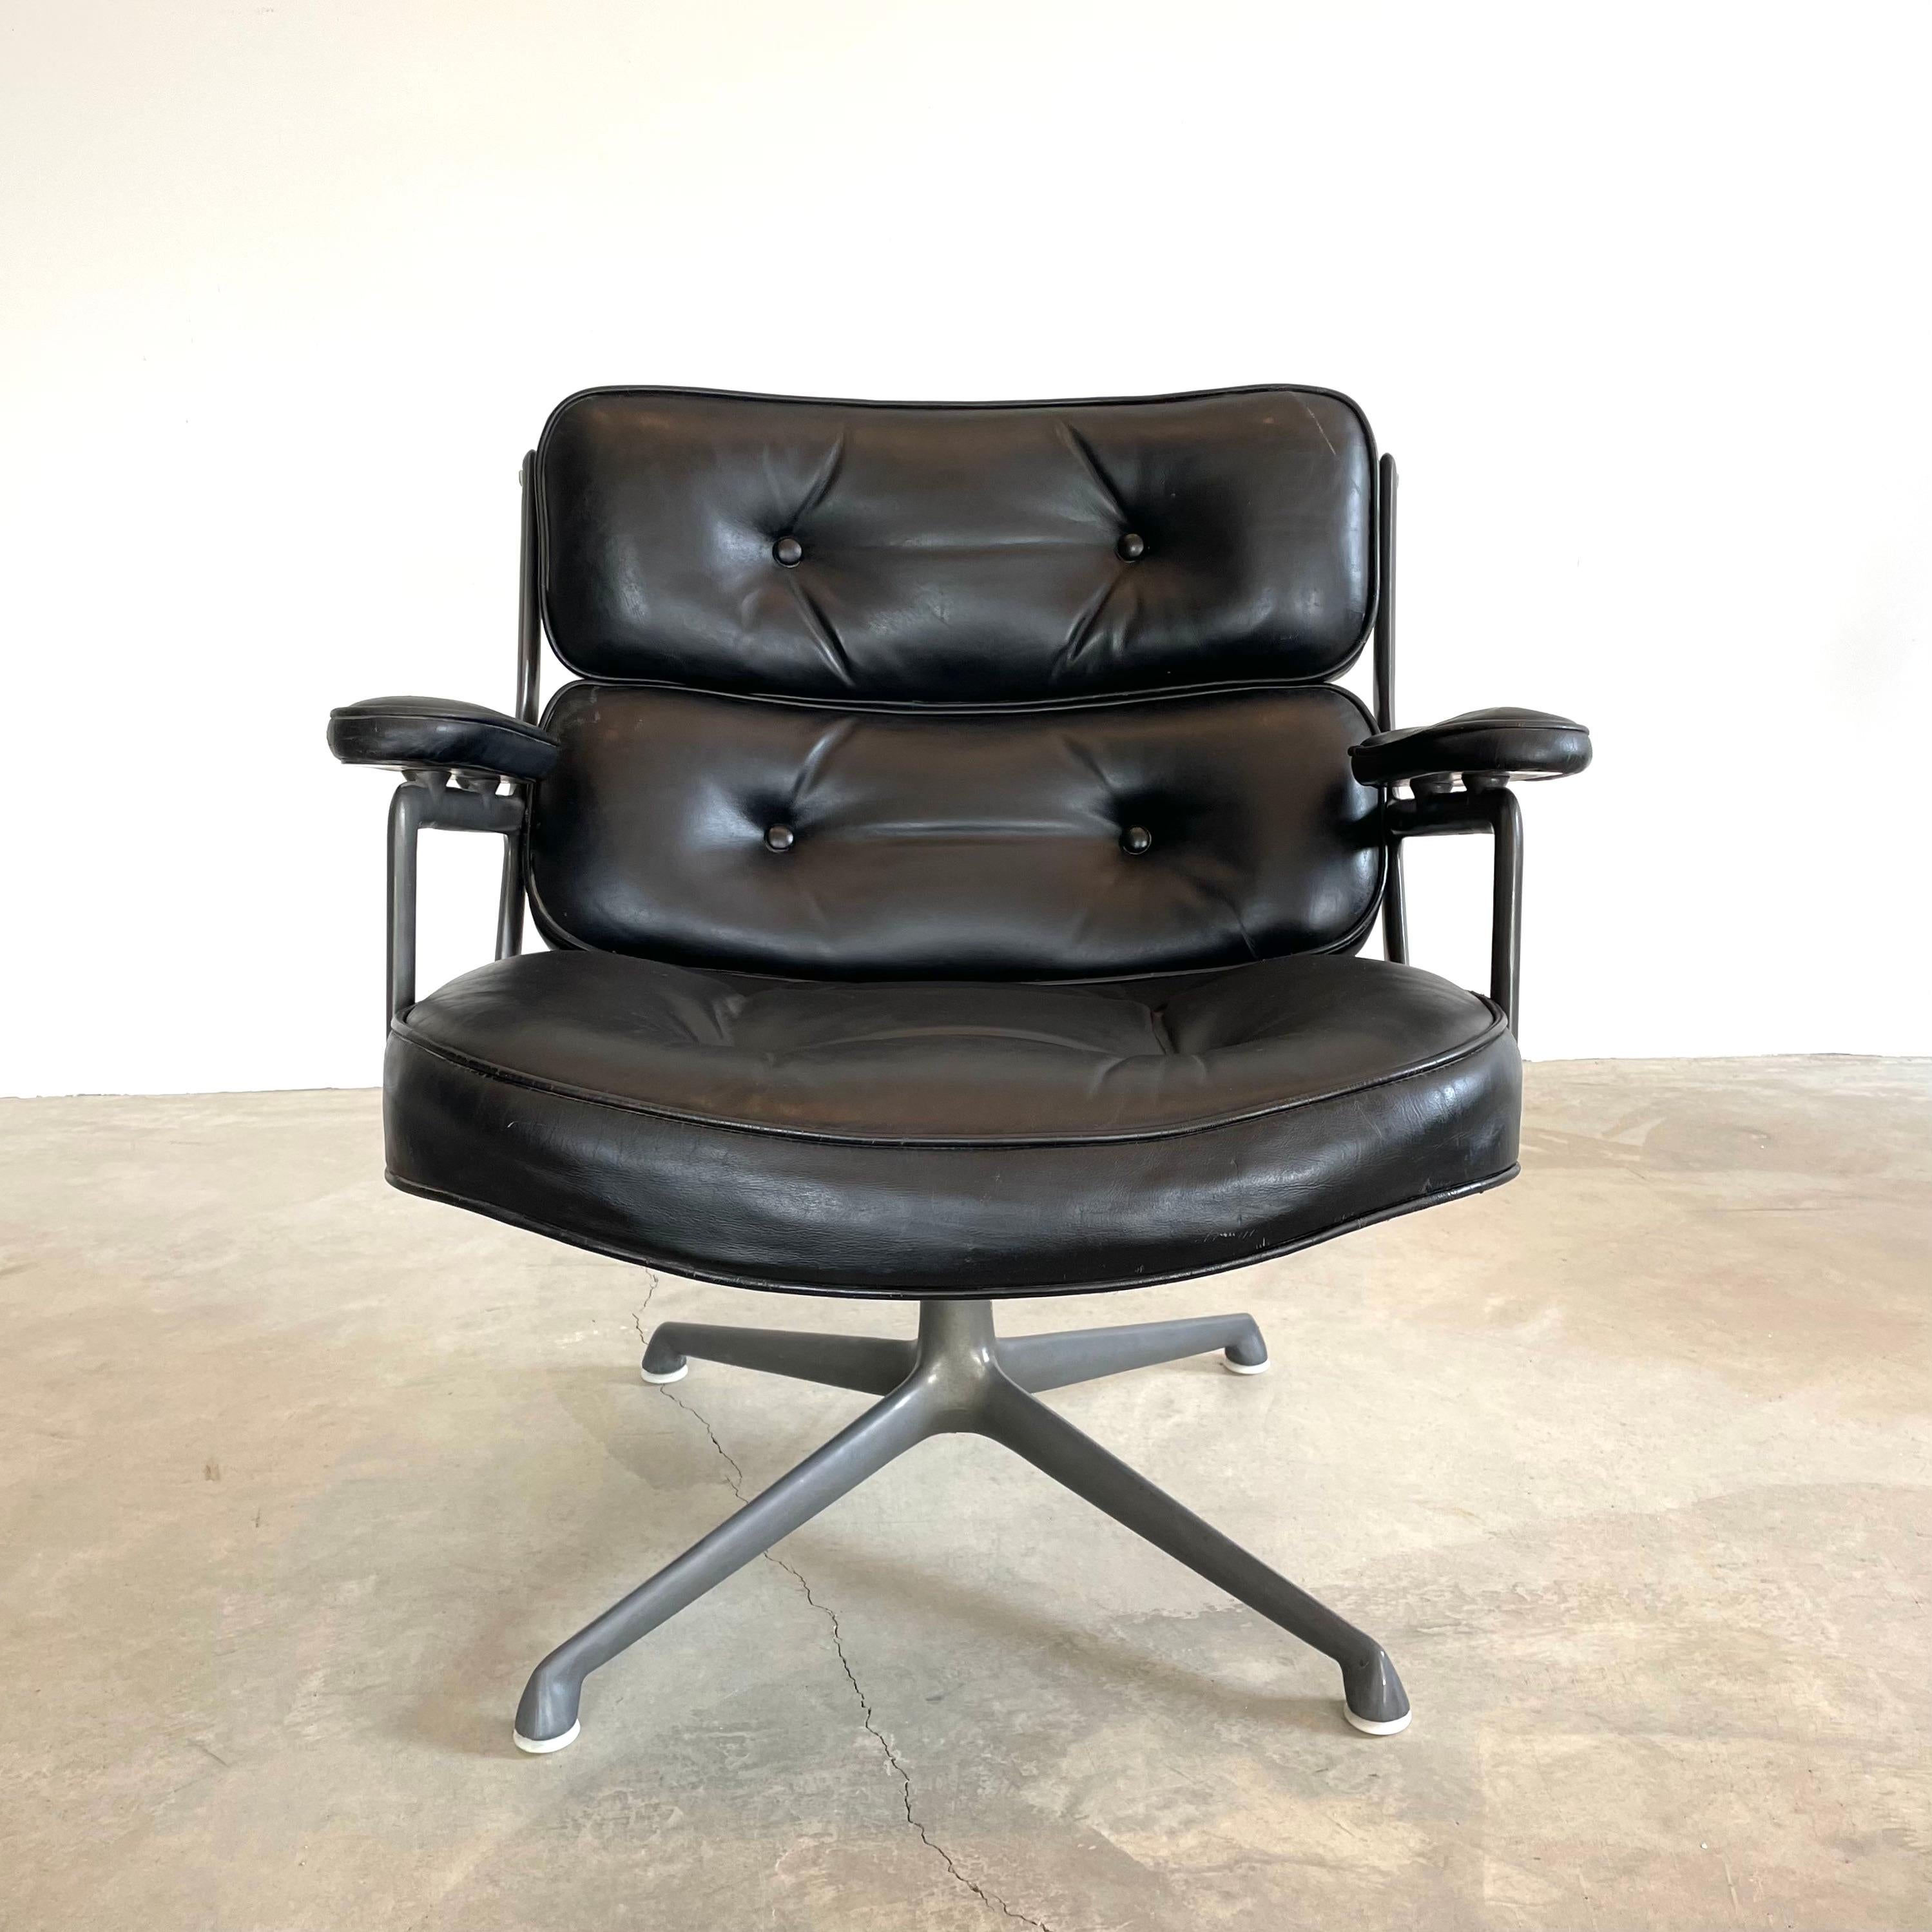 Mid-Century Modern Eames Time Life Lobby Lounge Chair in Black Leather for Herman Miller, 1980s USA For Sale